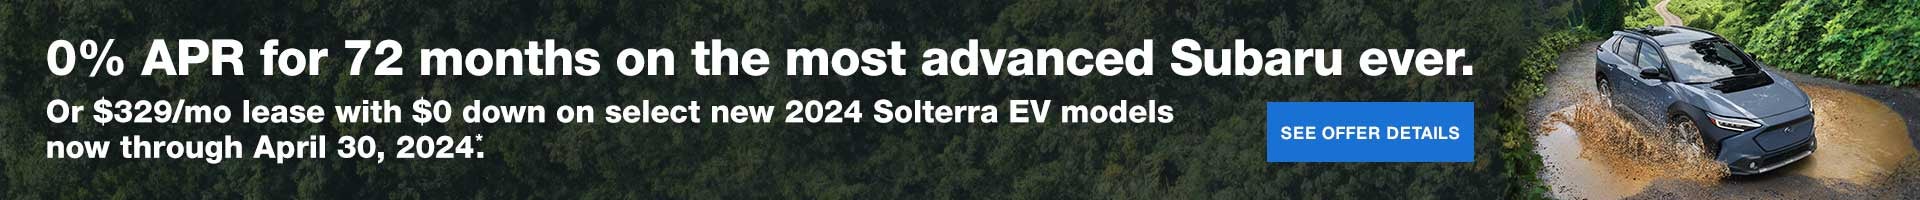 $0 APR for 72 months or $329/mo lease with $0 down on select new 2024 Solterra EV models